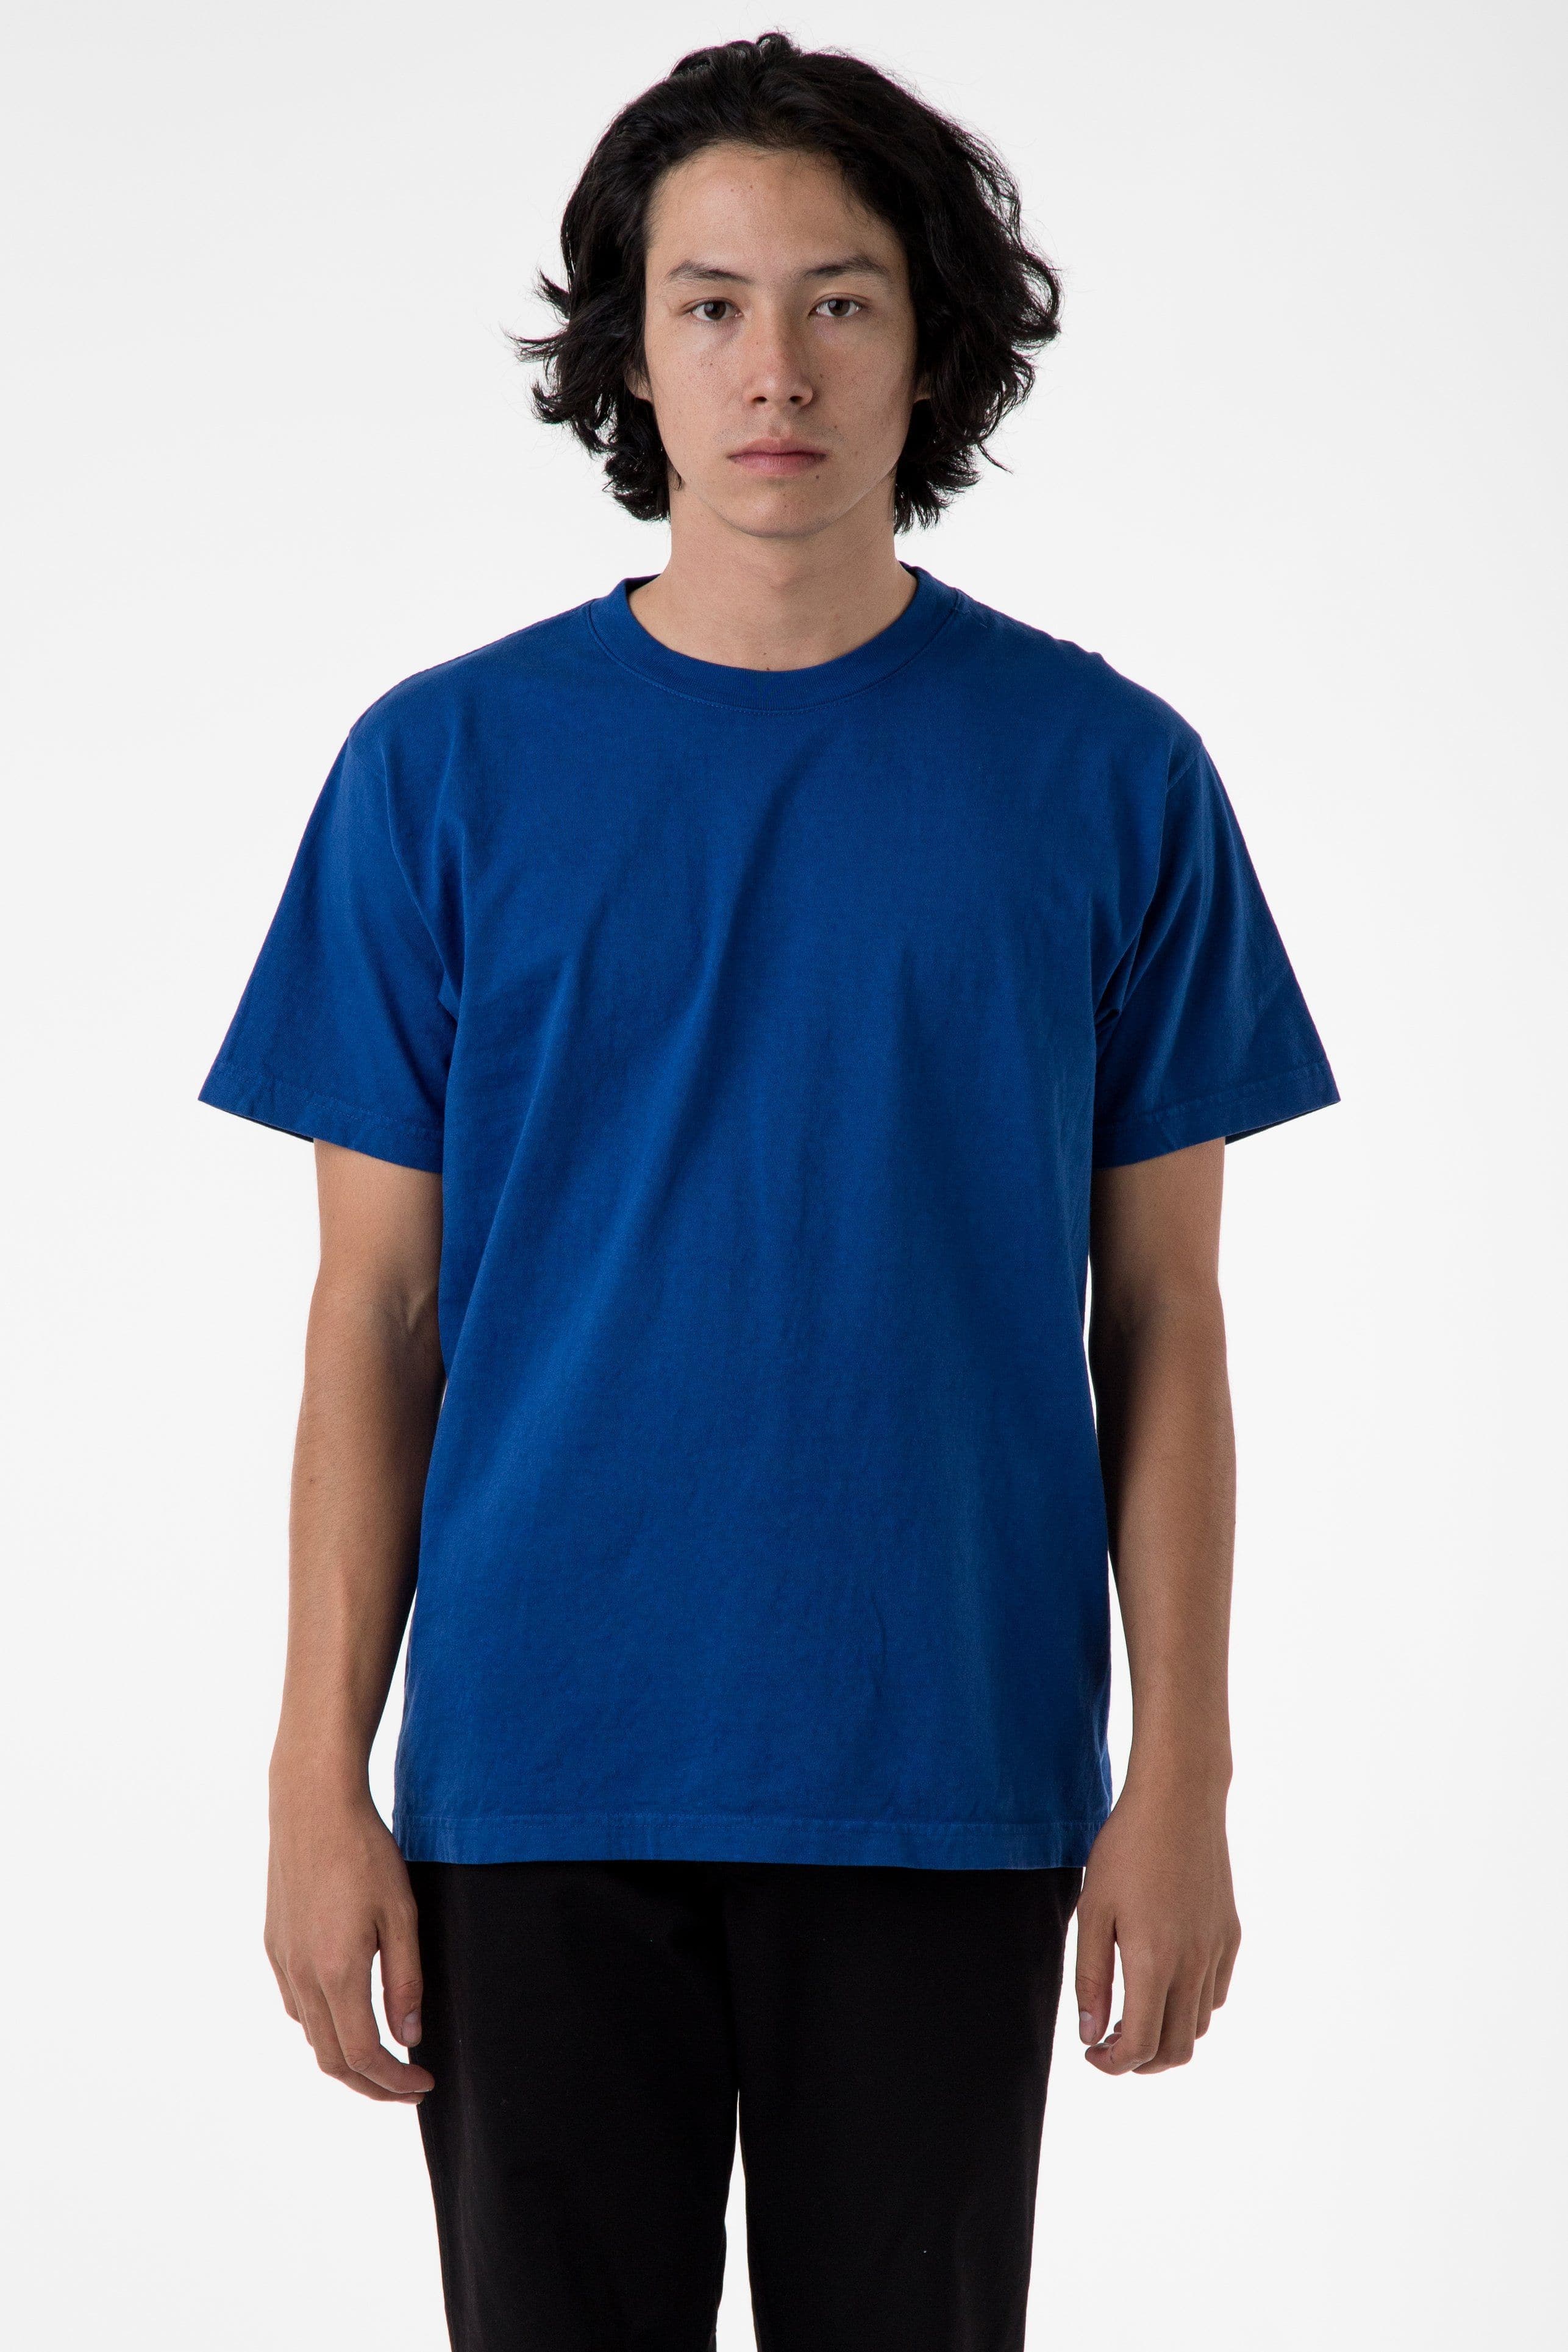 Los Angeles Apparel 1801GD - Heavyweight Garment Dyed Crew Neck T